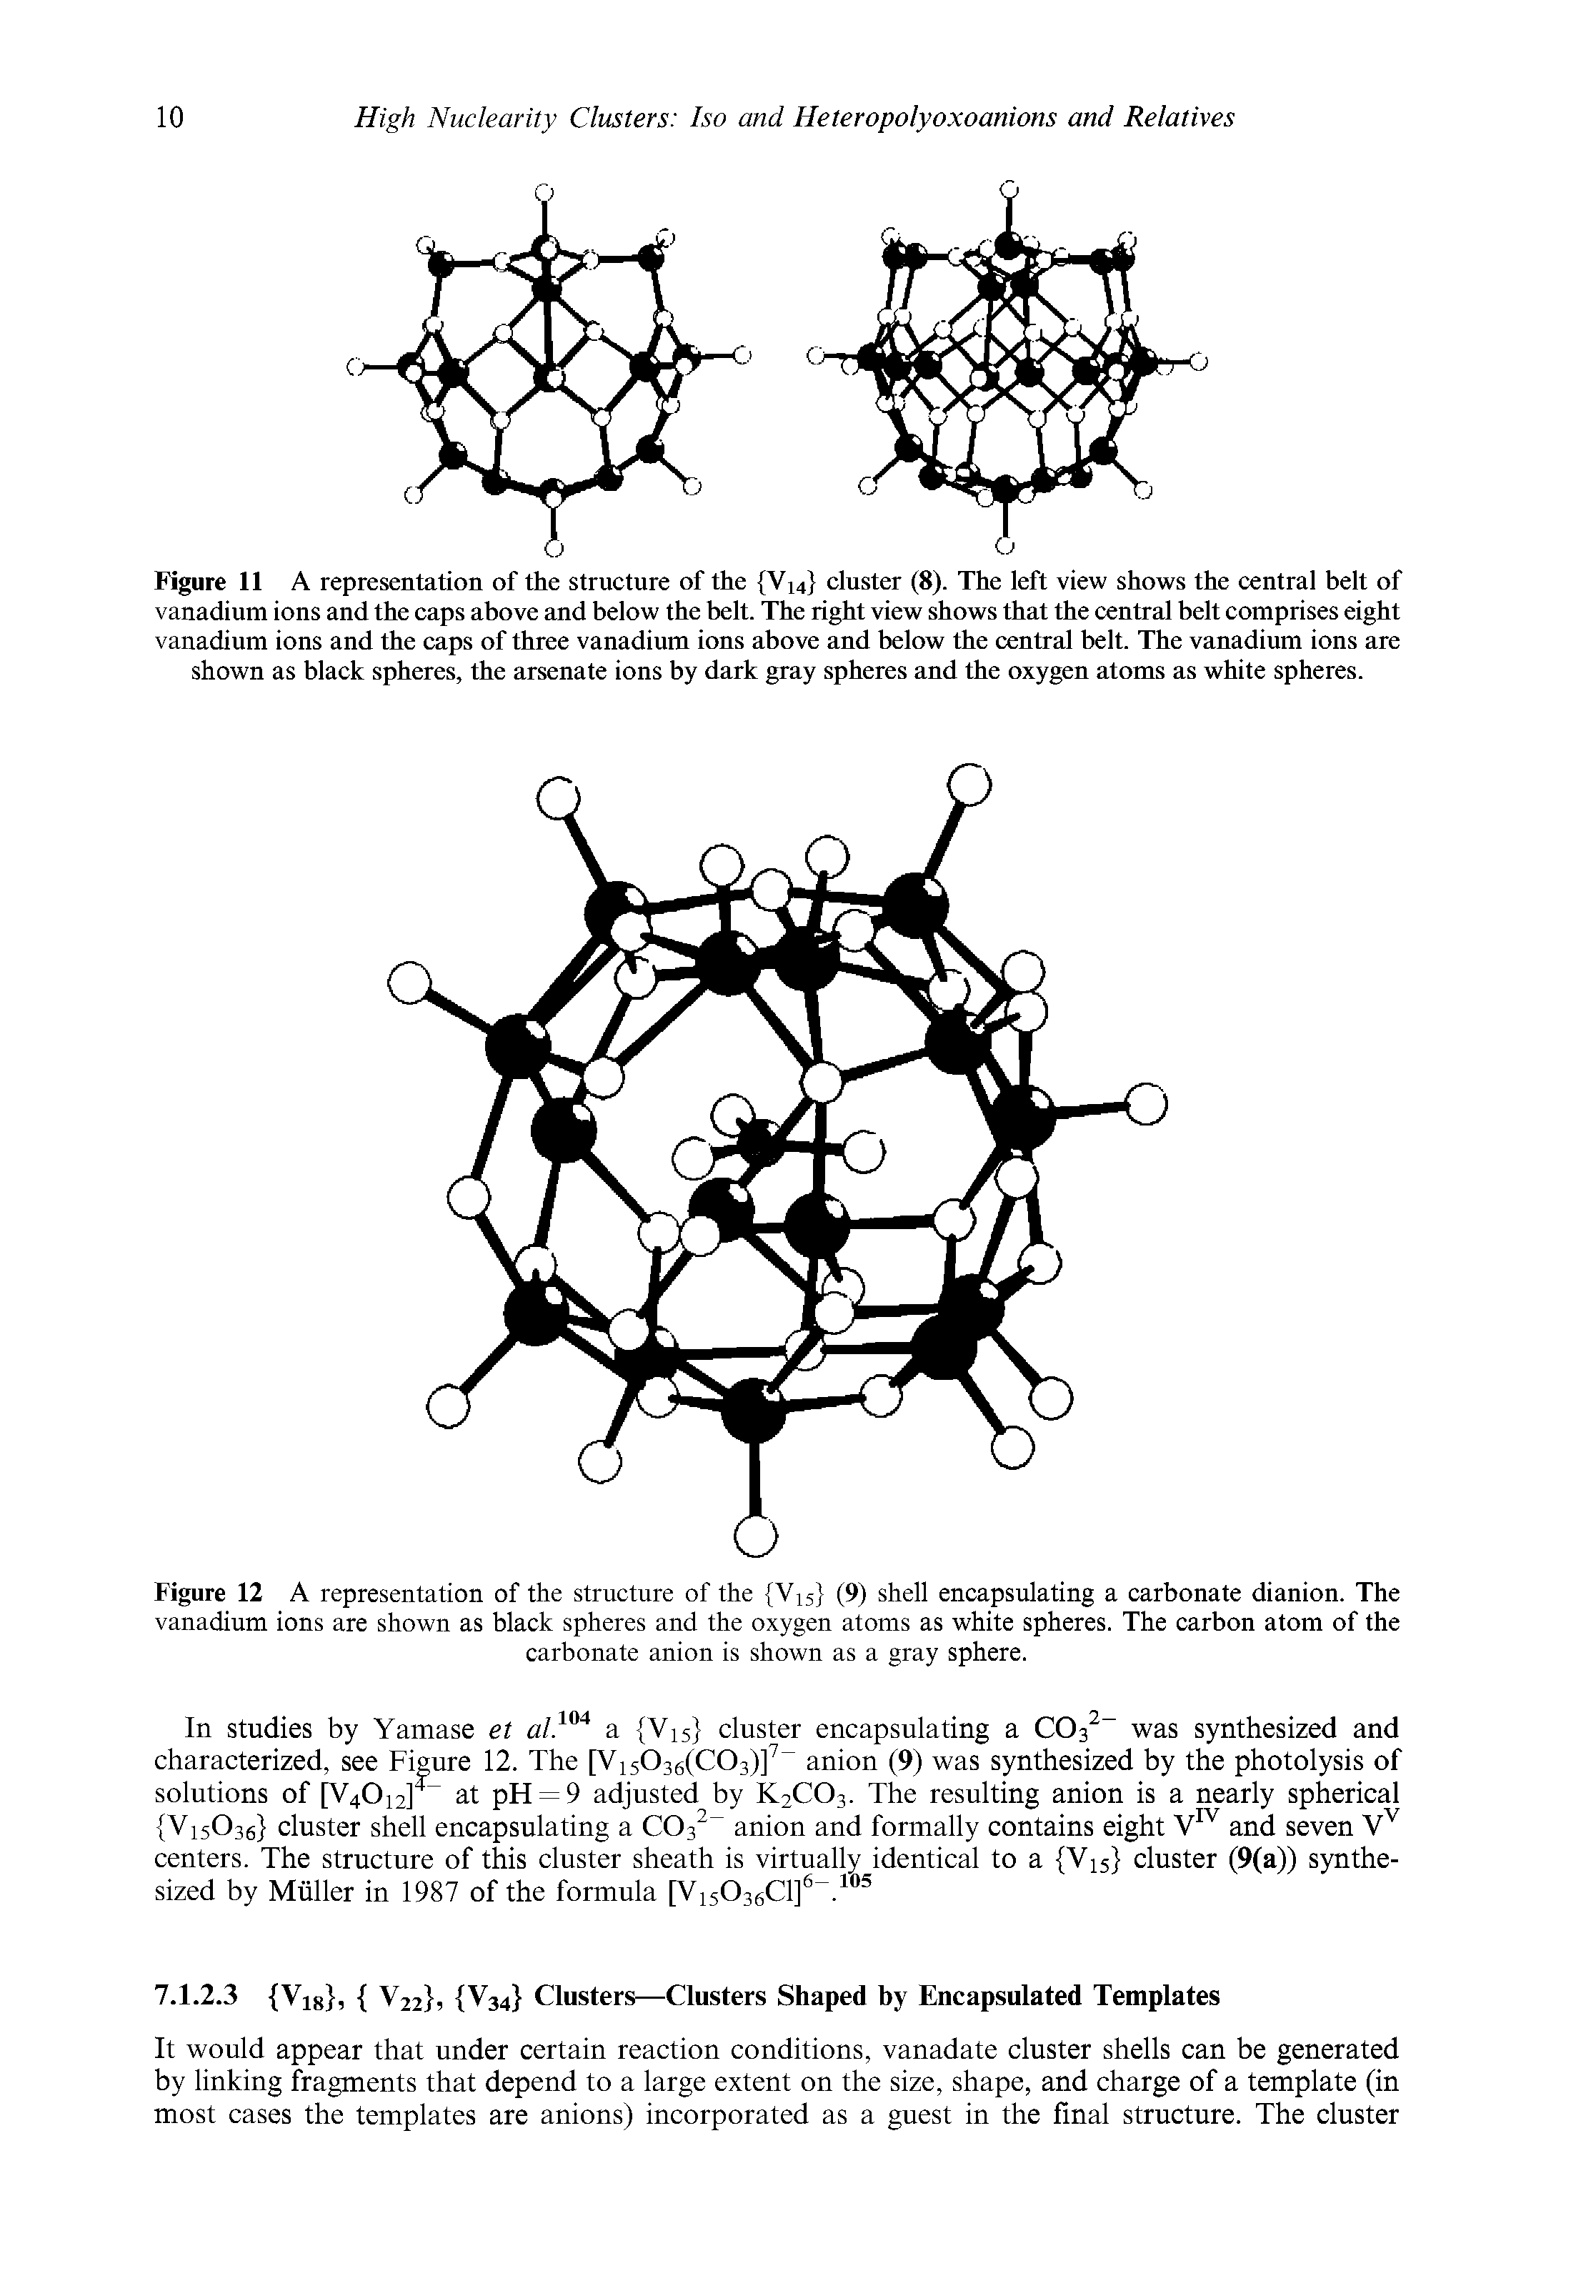 Figure 12 A representation of the structure of the V15 (9) shell encapsulating a carbonate dianion. The vanadium ions are shown as black spheres and the oxygen atoms as white spheres. The carbon atom of the...